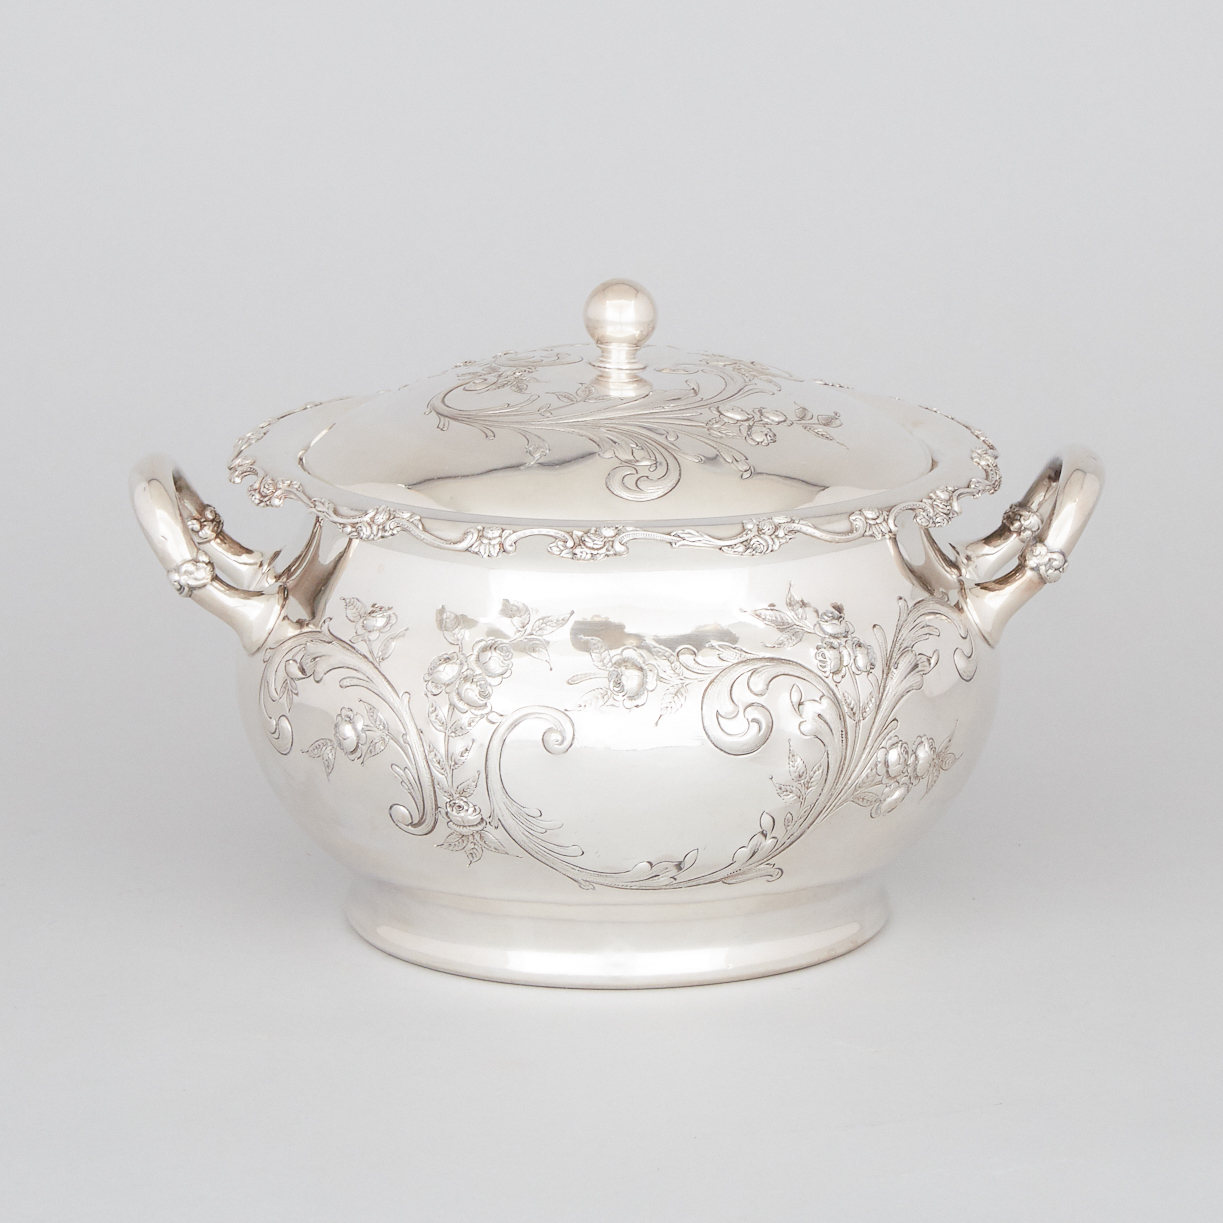 American Silver Soup Tureen, George C. Shreve & Co., San Francisco, Ca., late 19th century